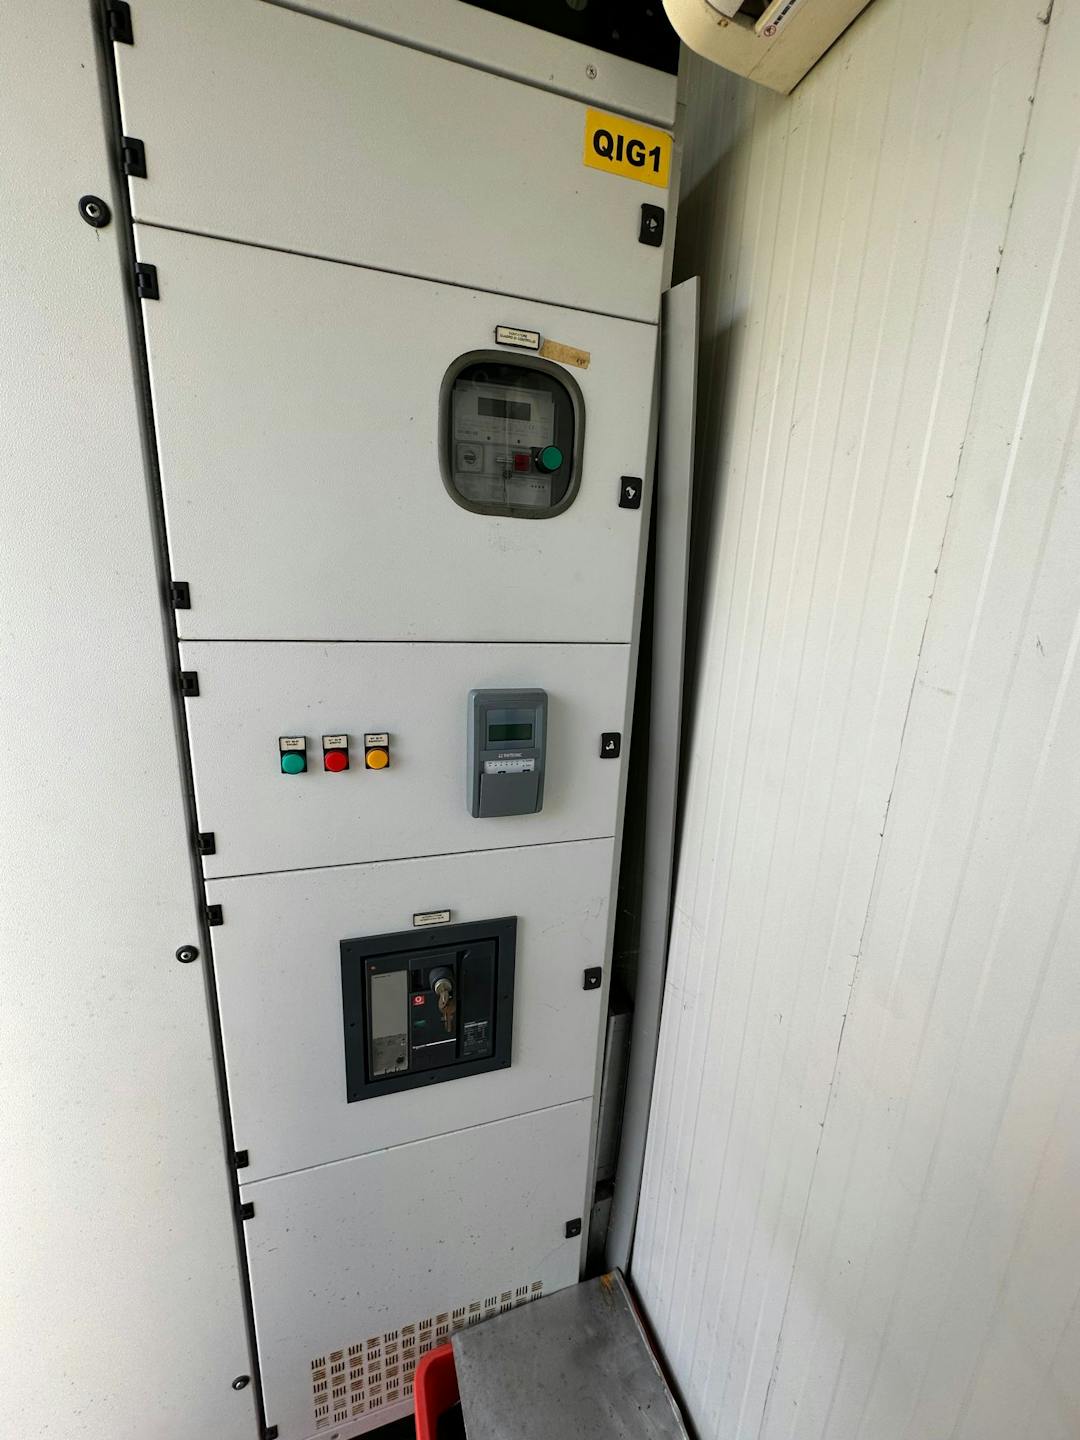 nullPhoto of Guascor FGLD180 Natural Gas Generator Set showing outside of control panel door - used industrial genset for sale uk